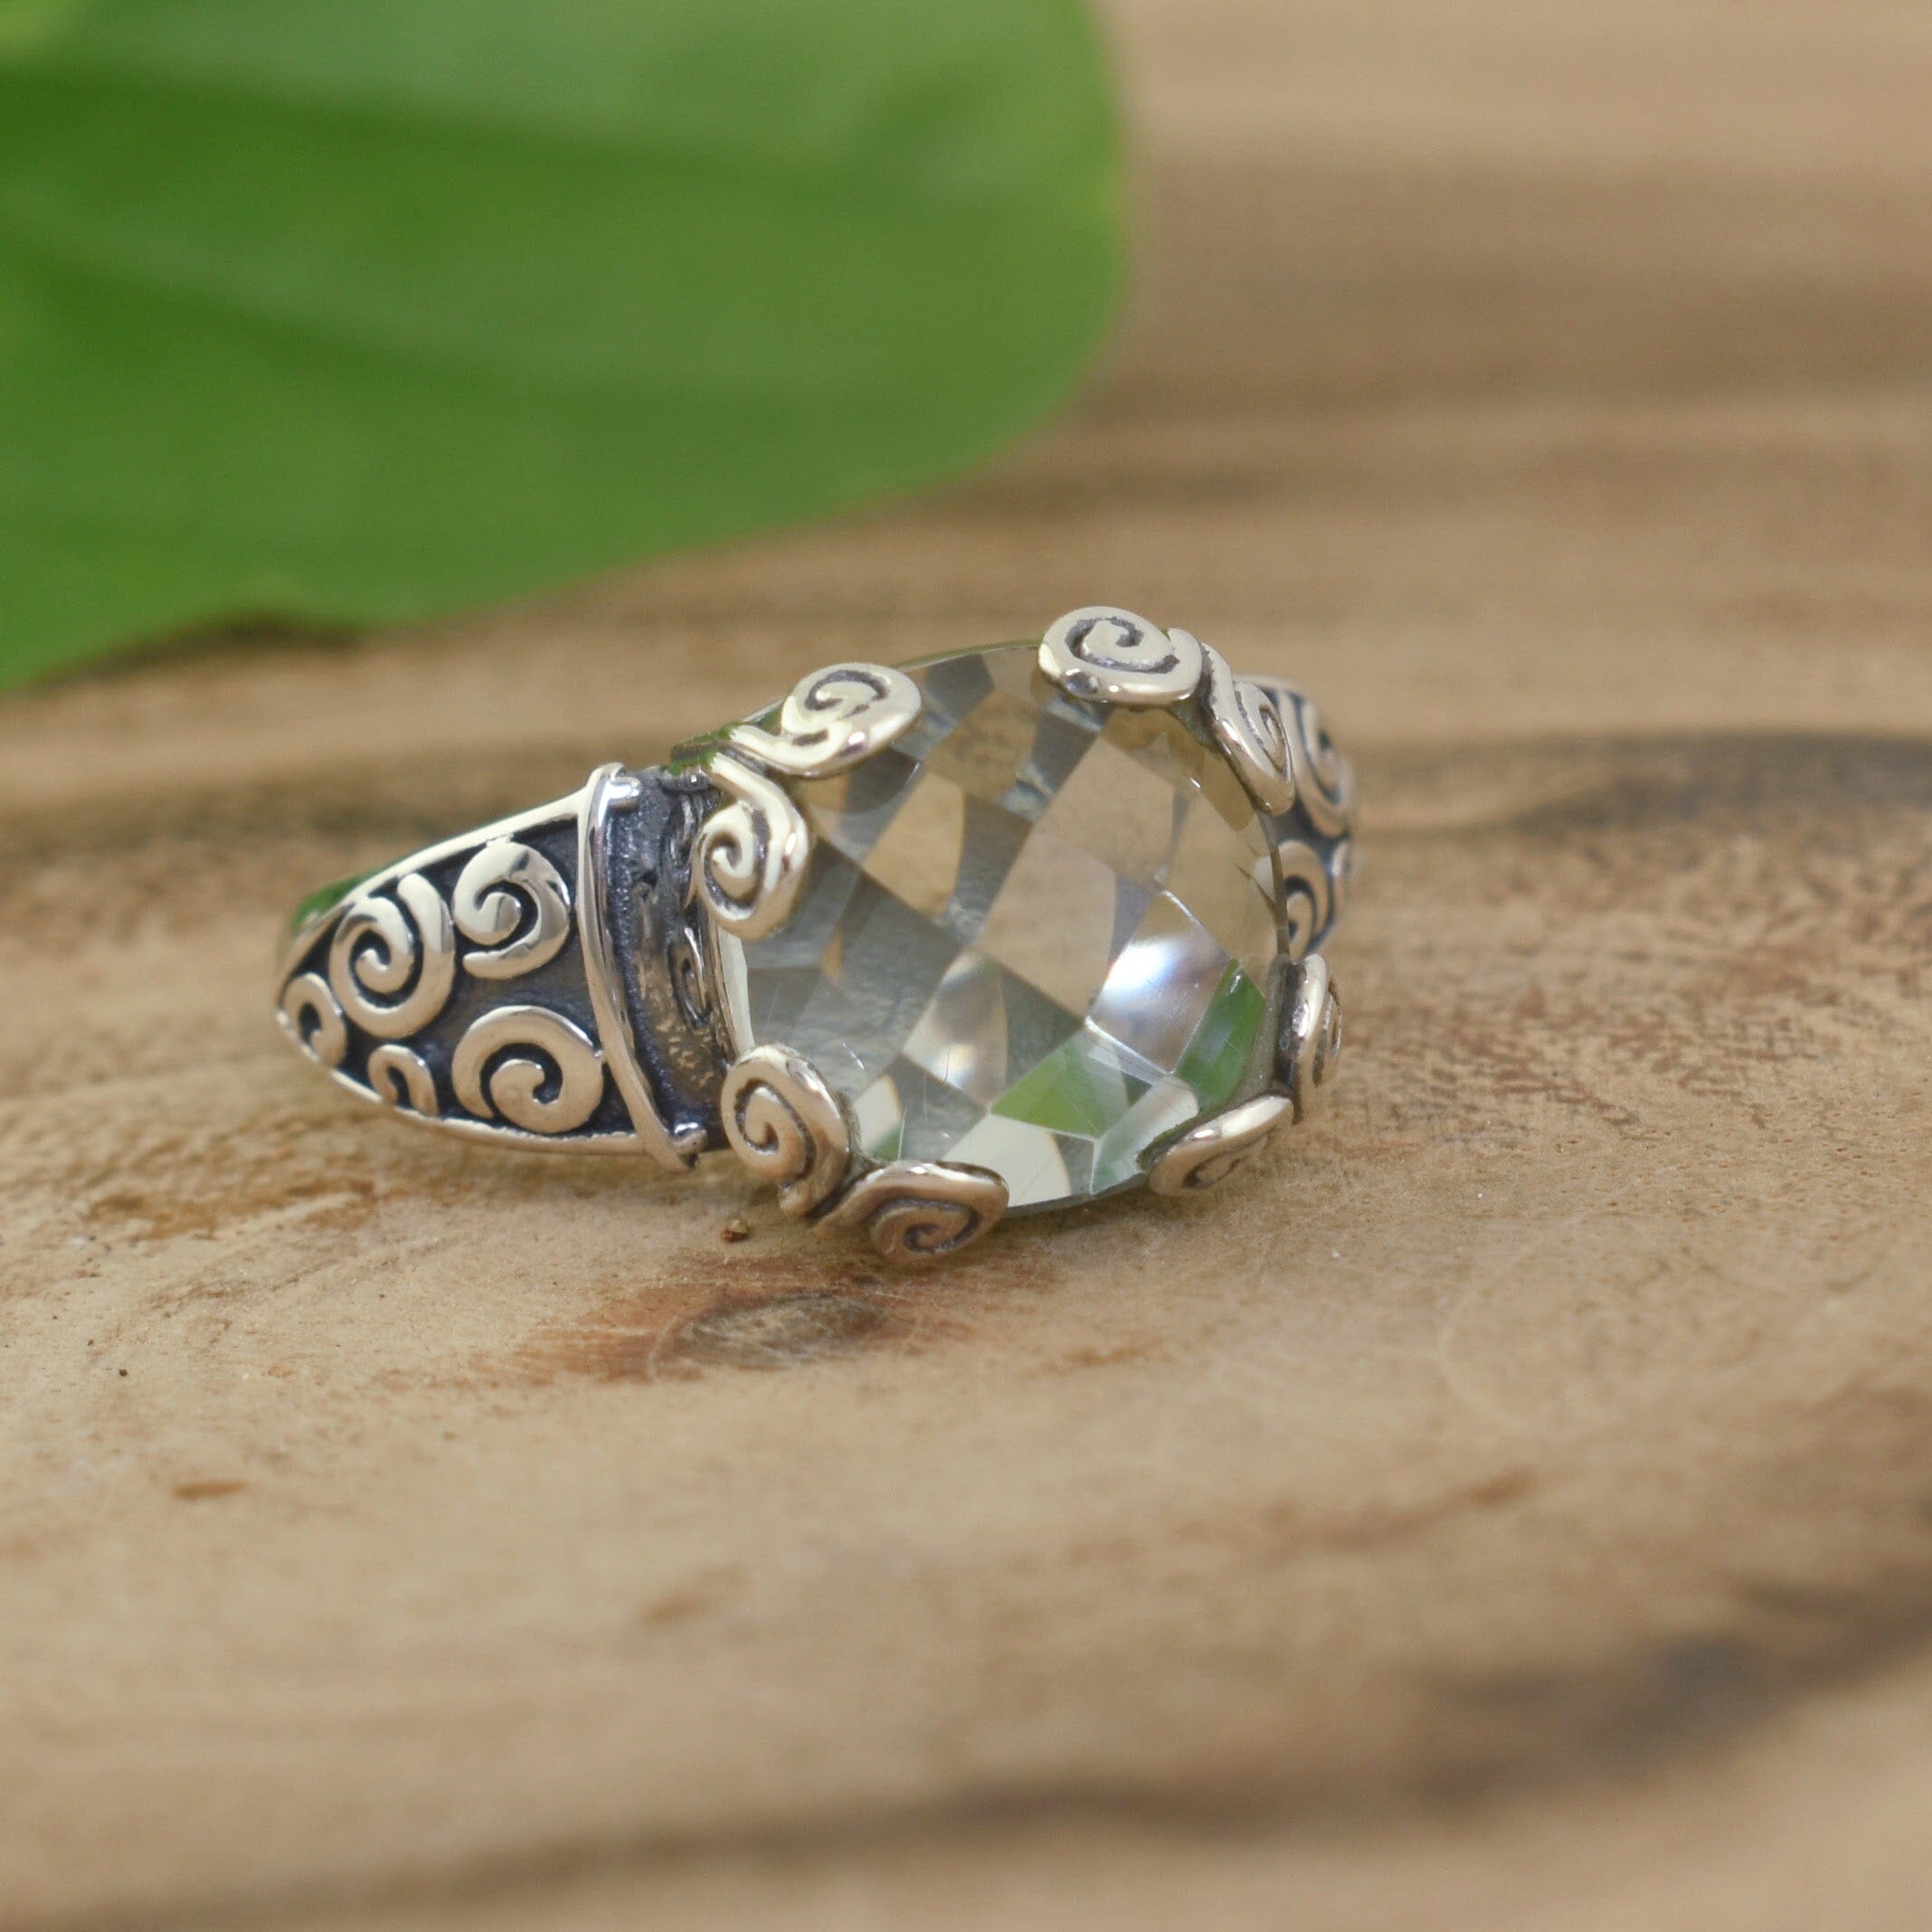 .925 sterling silver ring with genuine light green amethyst stone